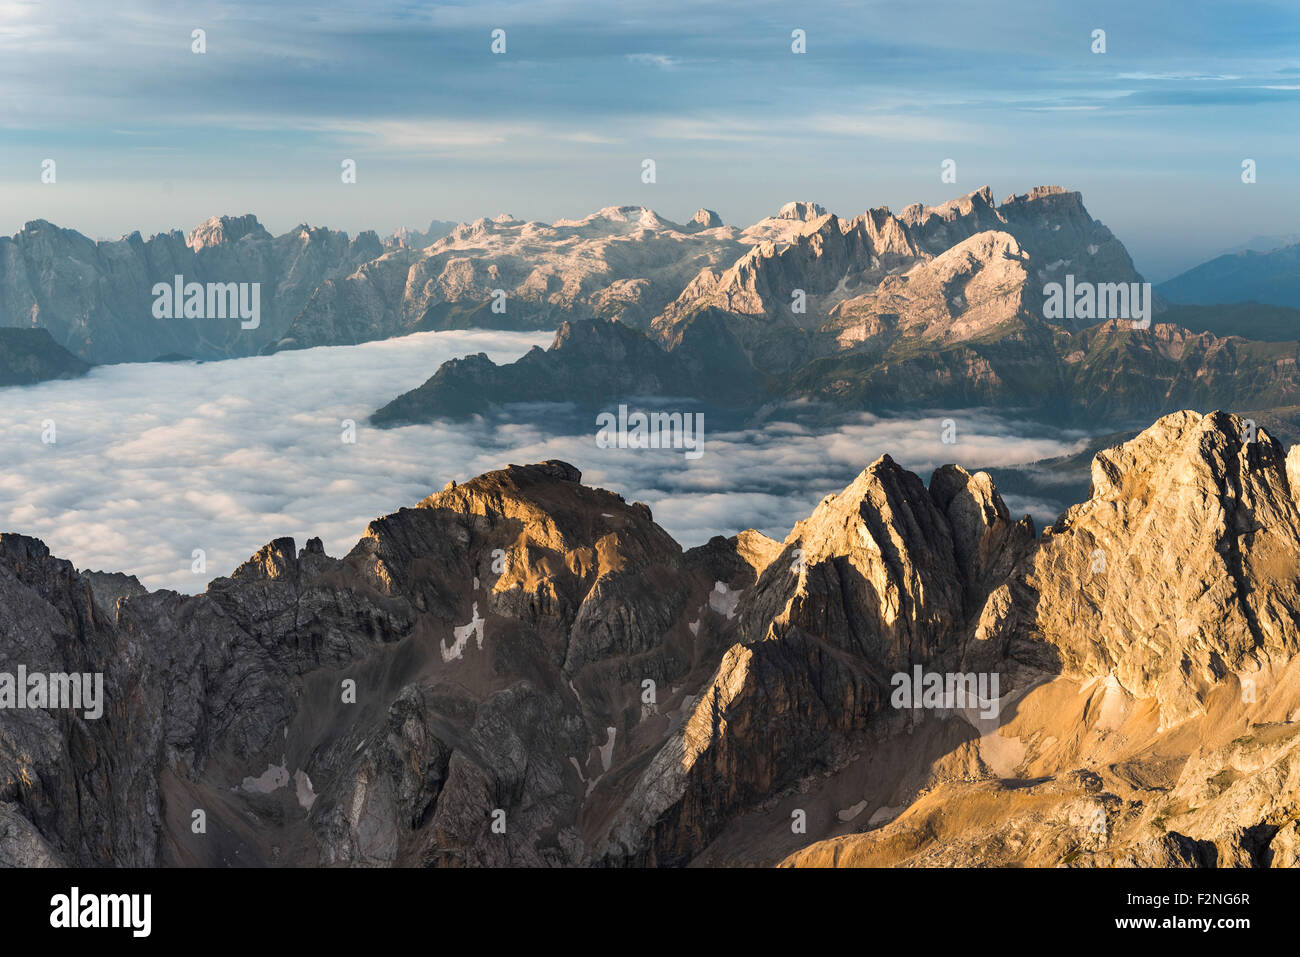 Dolomites at sunrise, view from the summit Punta Penia towards the south, highest peaks of the Dolomites, Marmolada Stock Photo